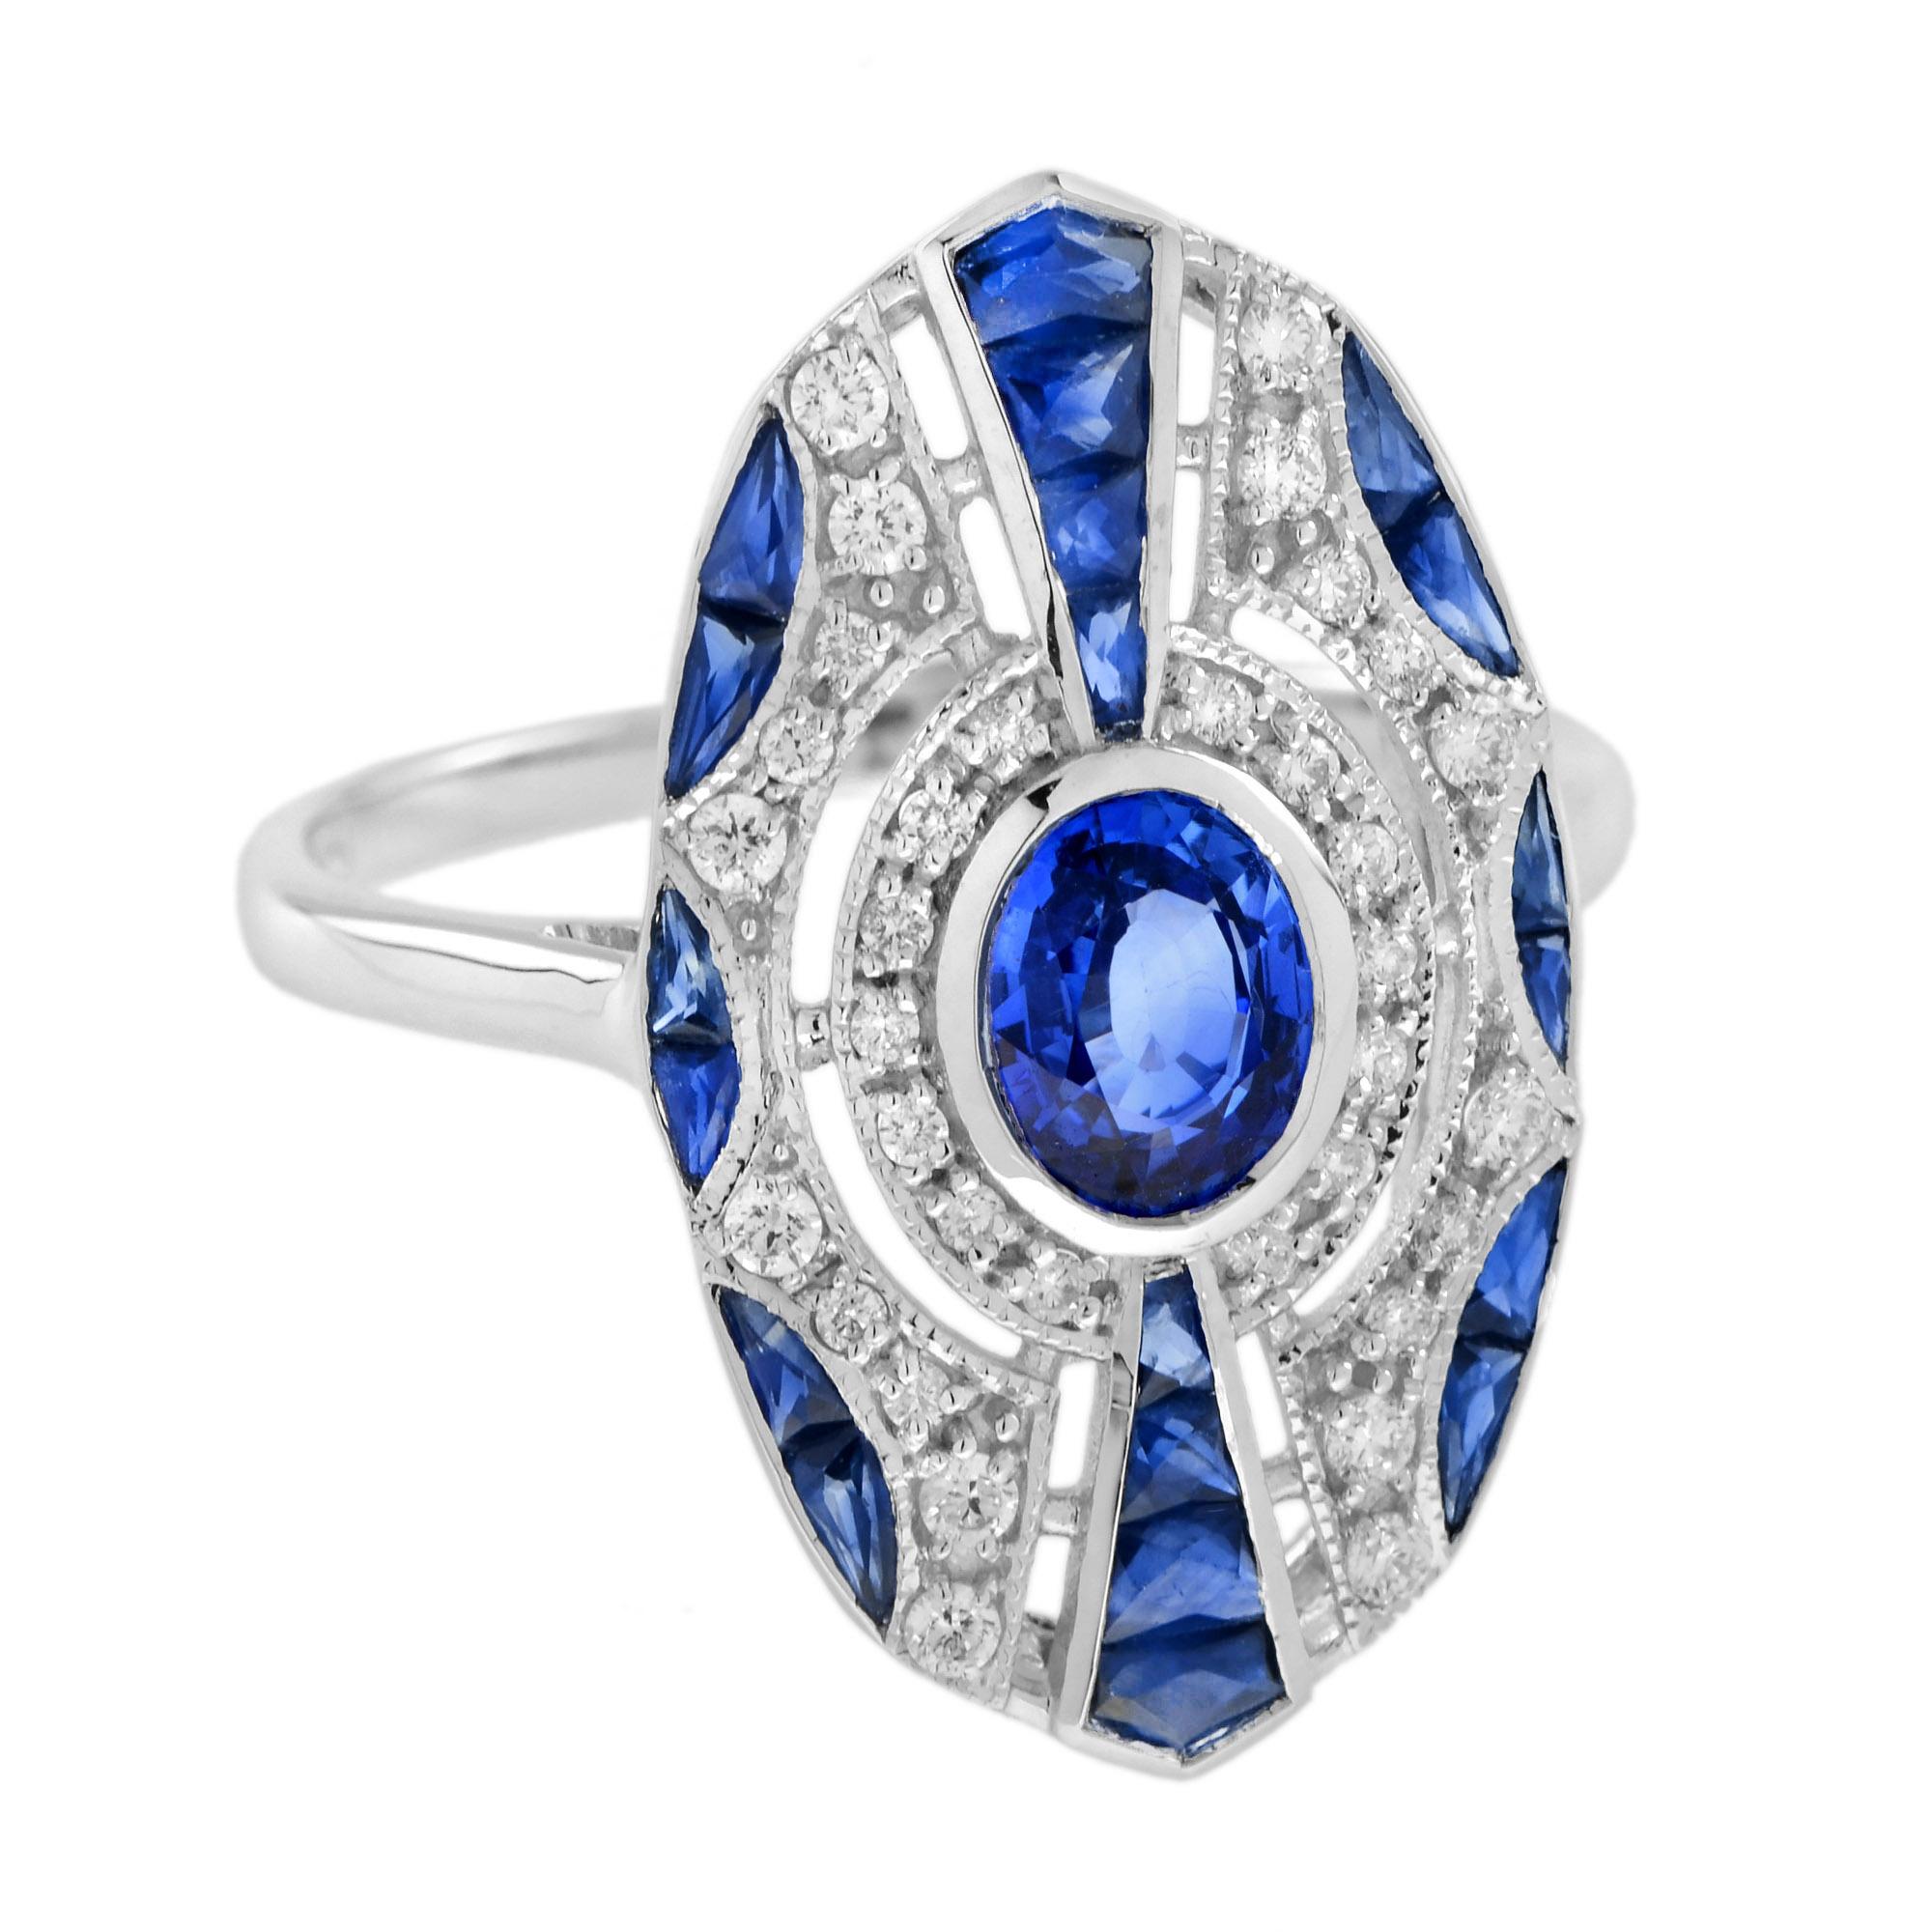 Oval Cut Ceylon Sapphire and Diamond Art Deco Style Dinner Ring in 18K White Gold For Sale